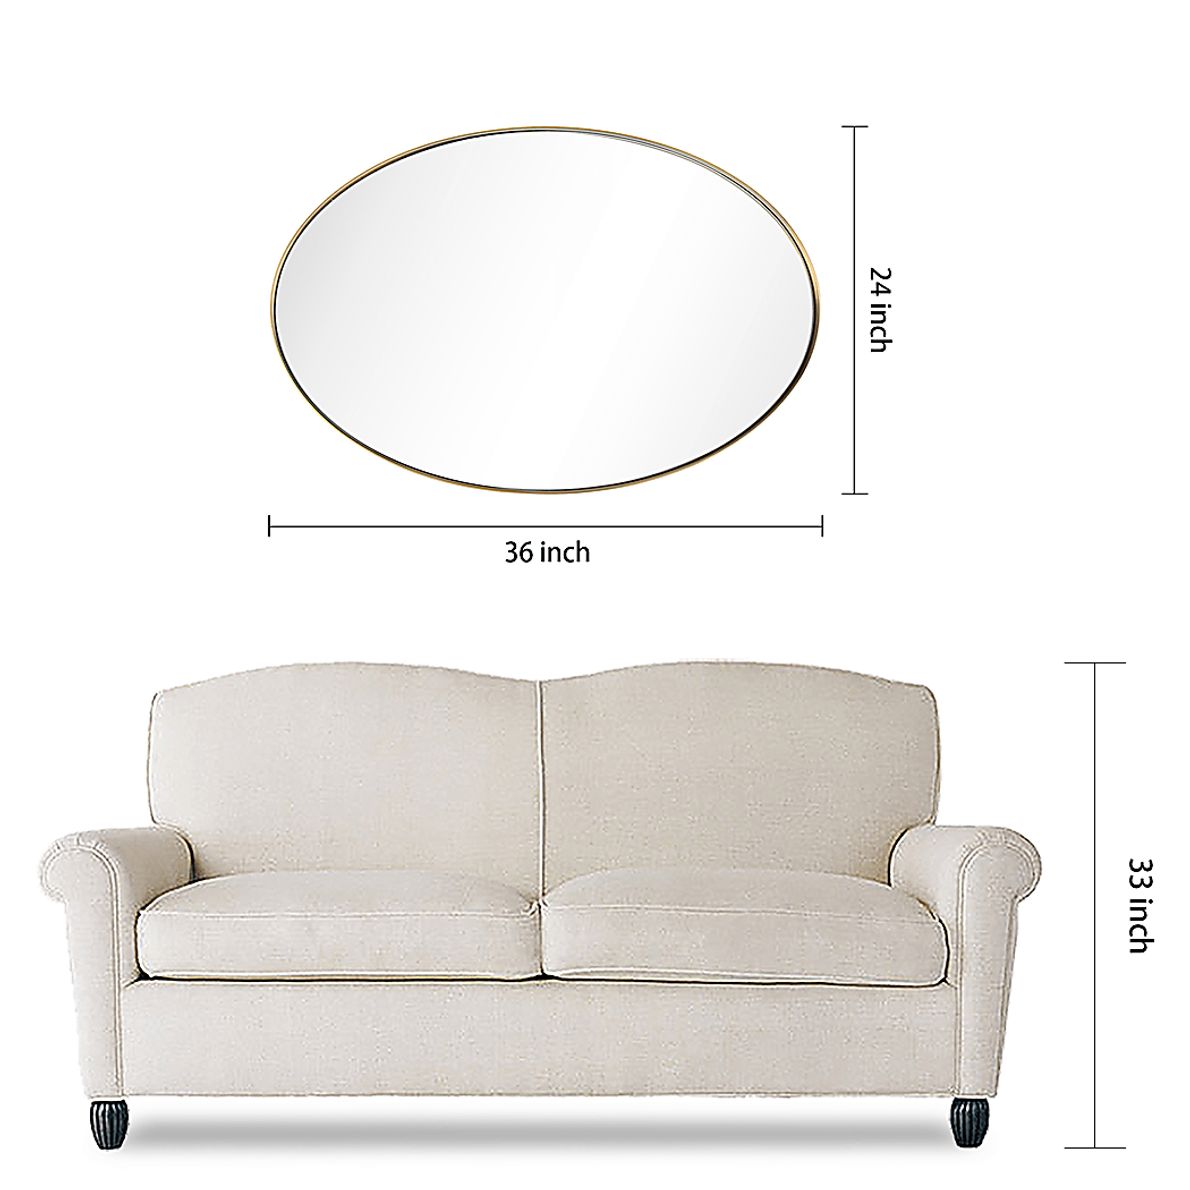 Zaylee Gold Oval Mirror